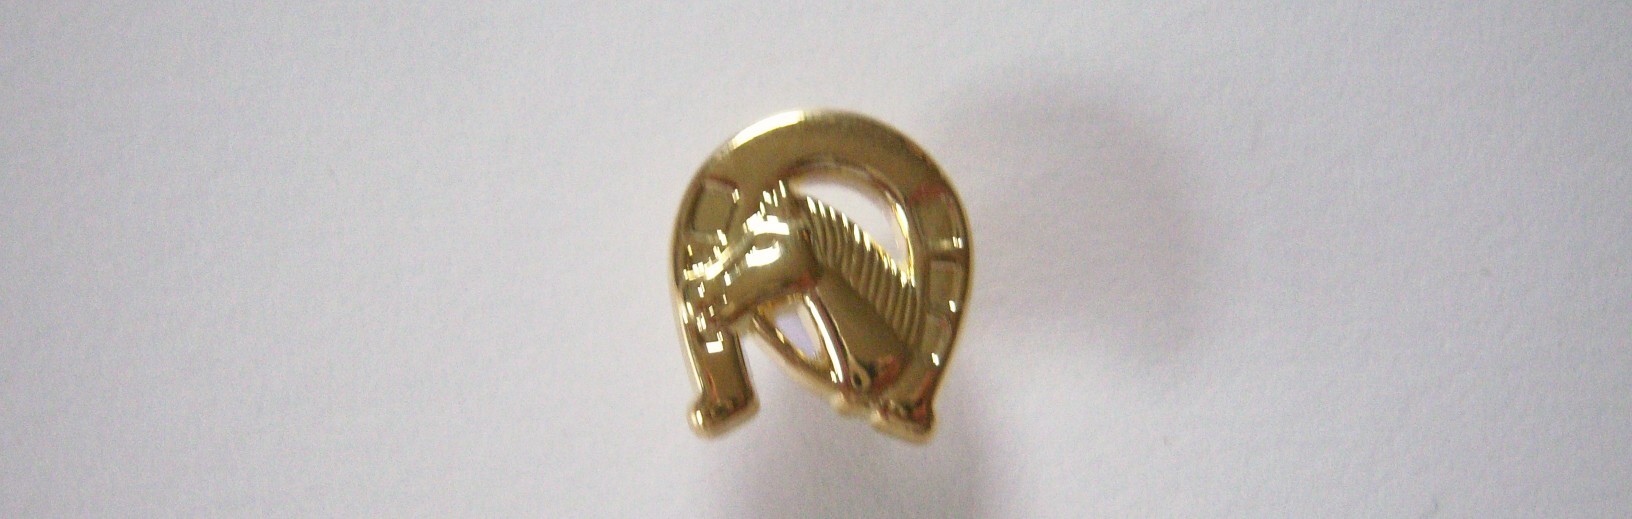 Gold Horse in Horseshoe 3/4" Poly Shank Button